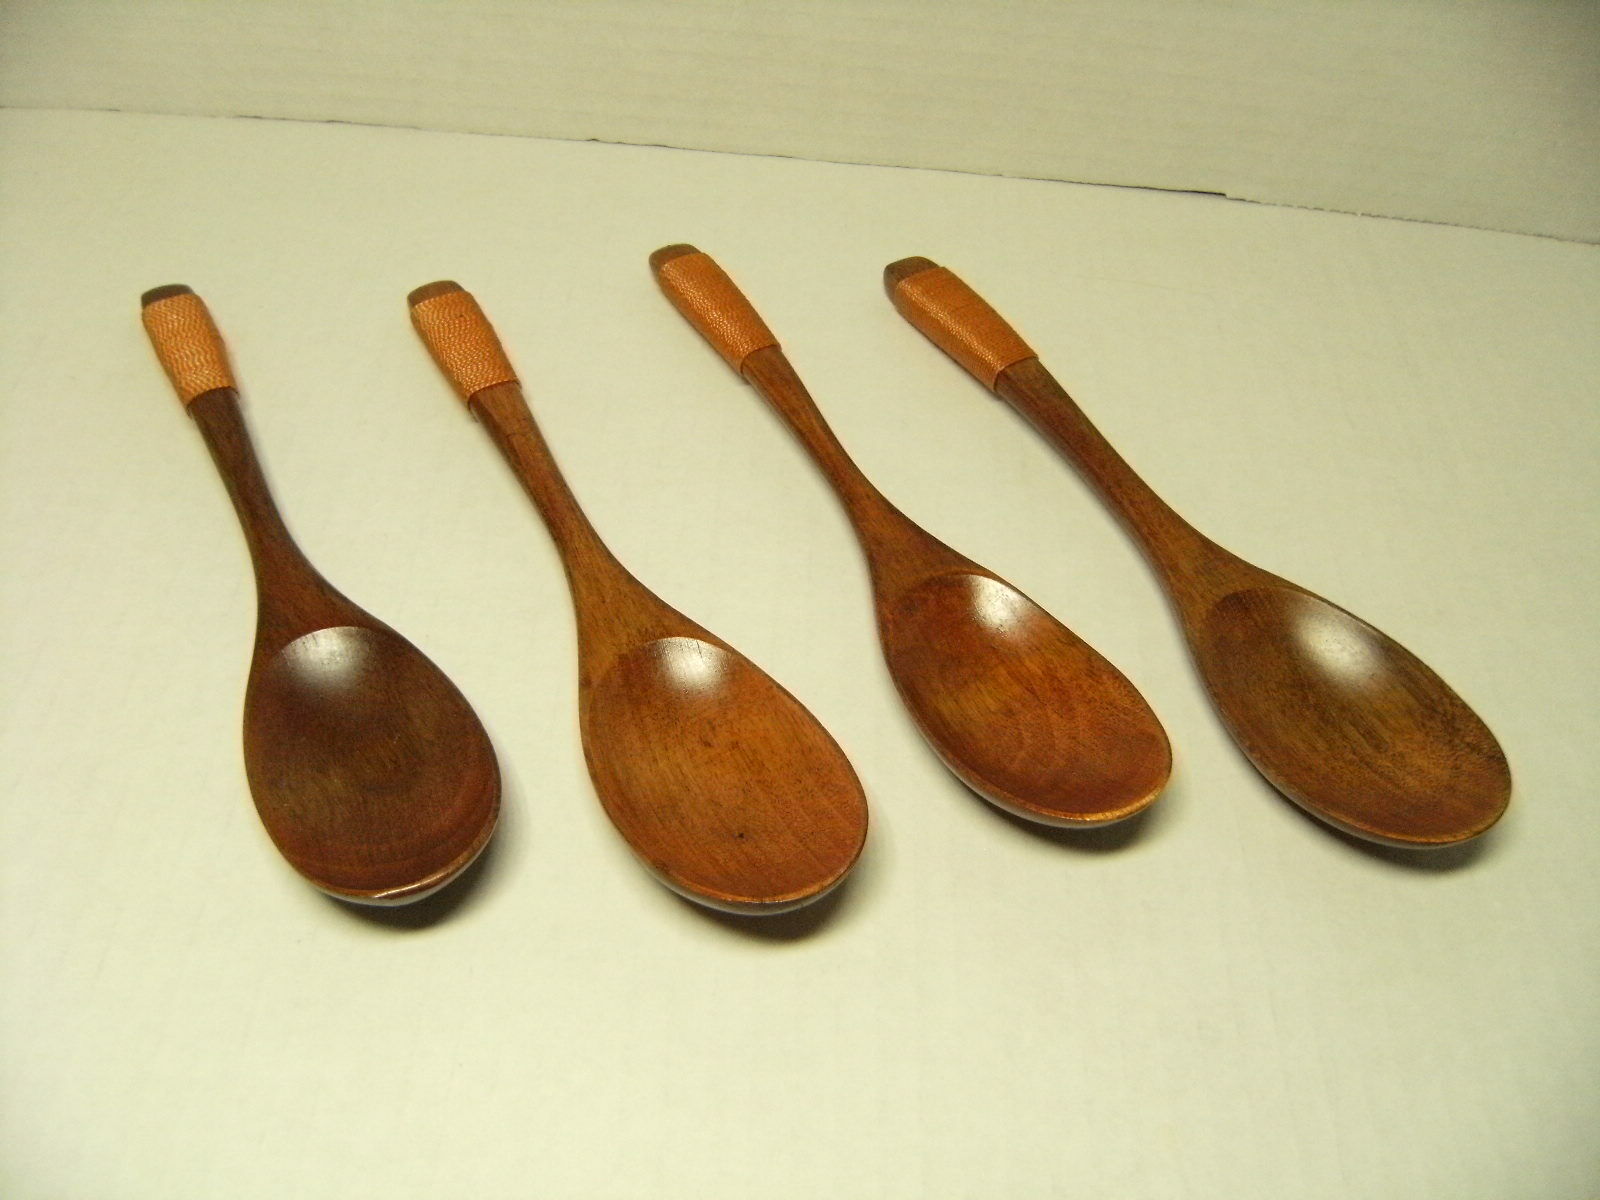 4 Pcs Set Handmade Natural Wood Wooden Table Spoons Soup Broth Cooking Kitchen